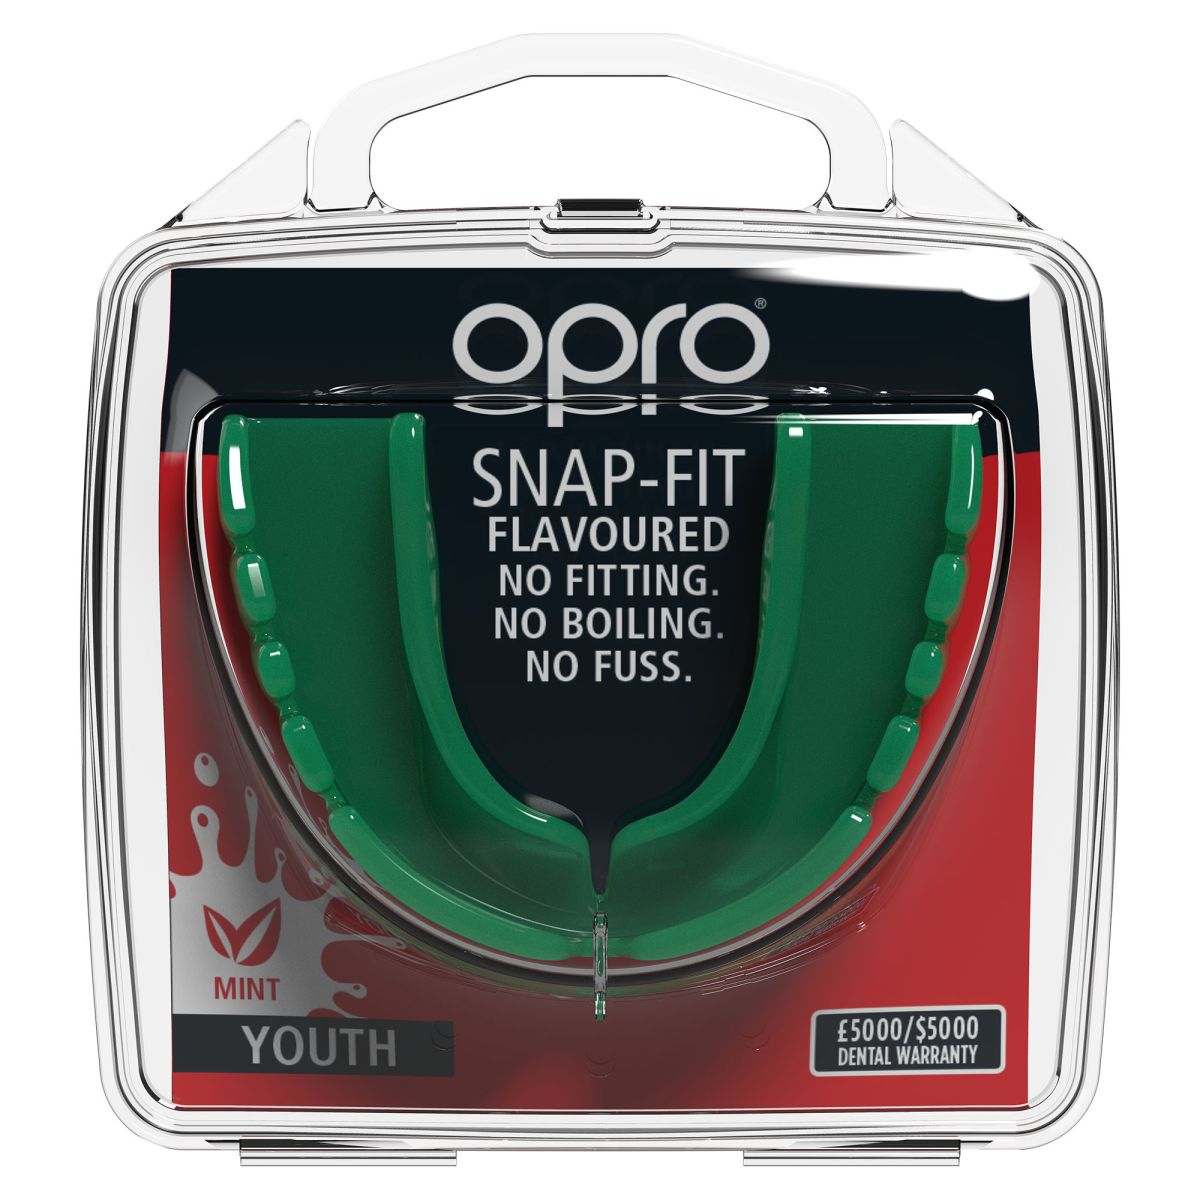 OPRO Snap-Fit Mint Flavored Mouthguard Junior